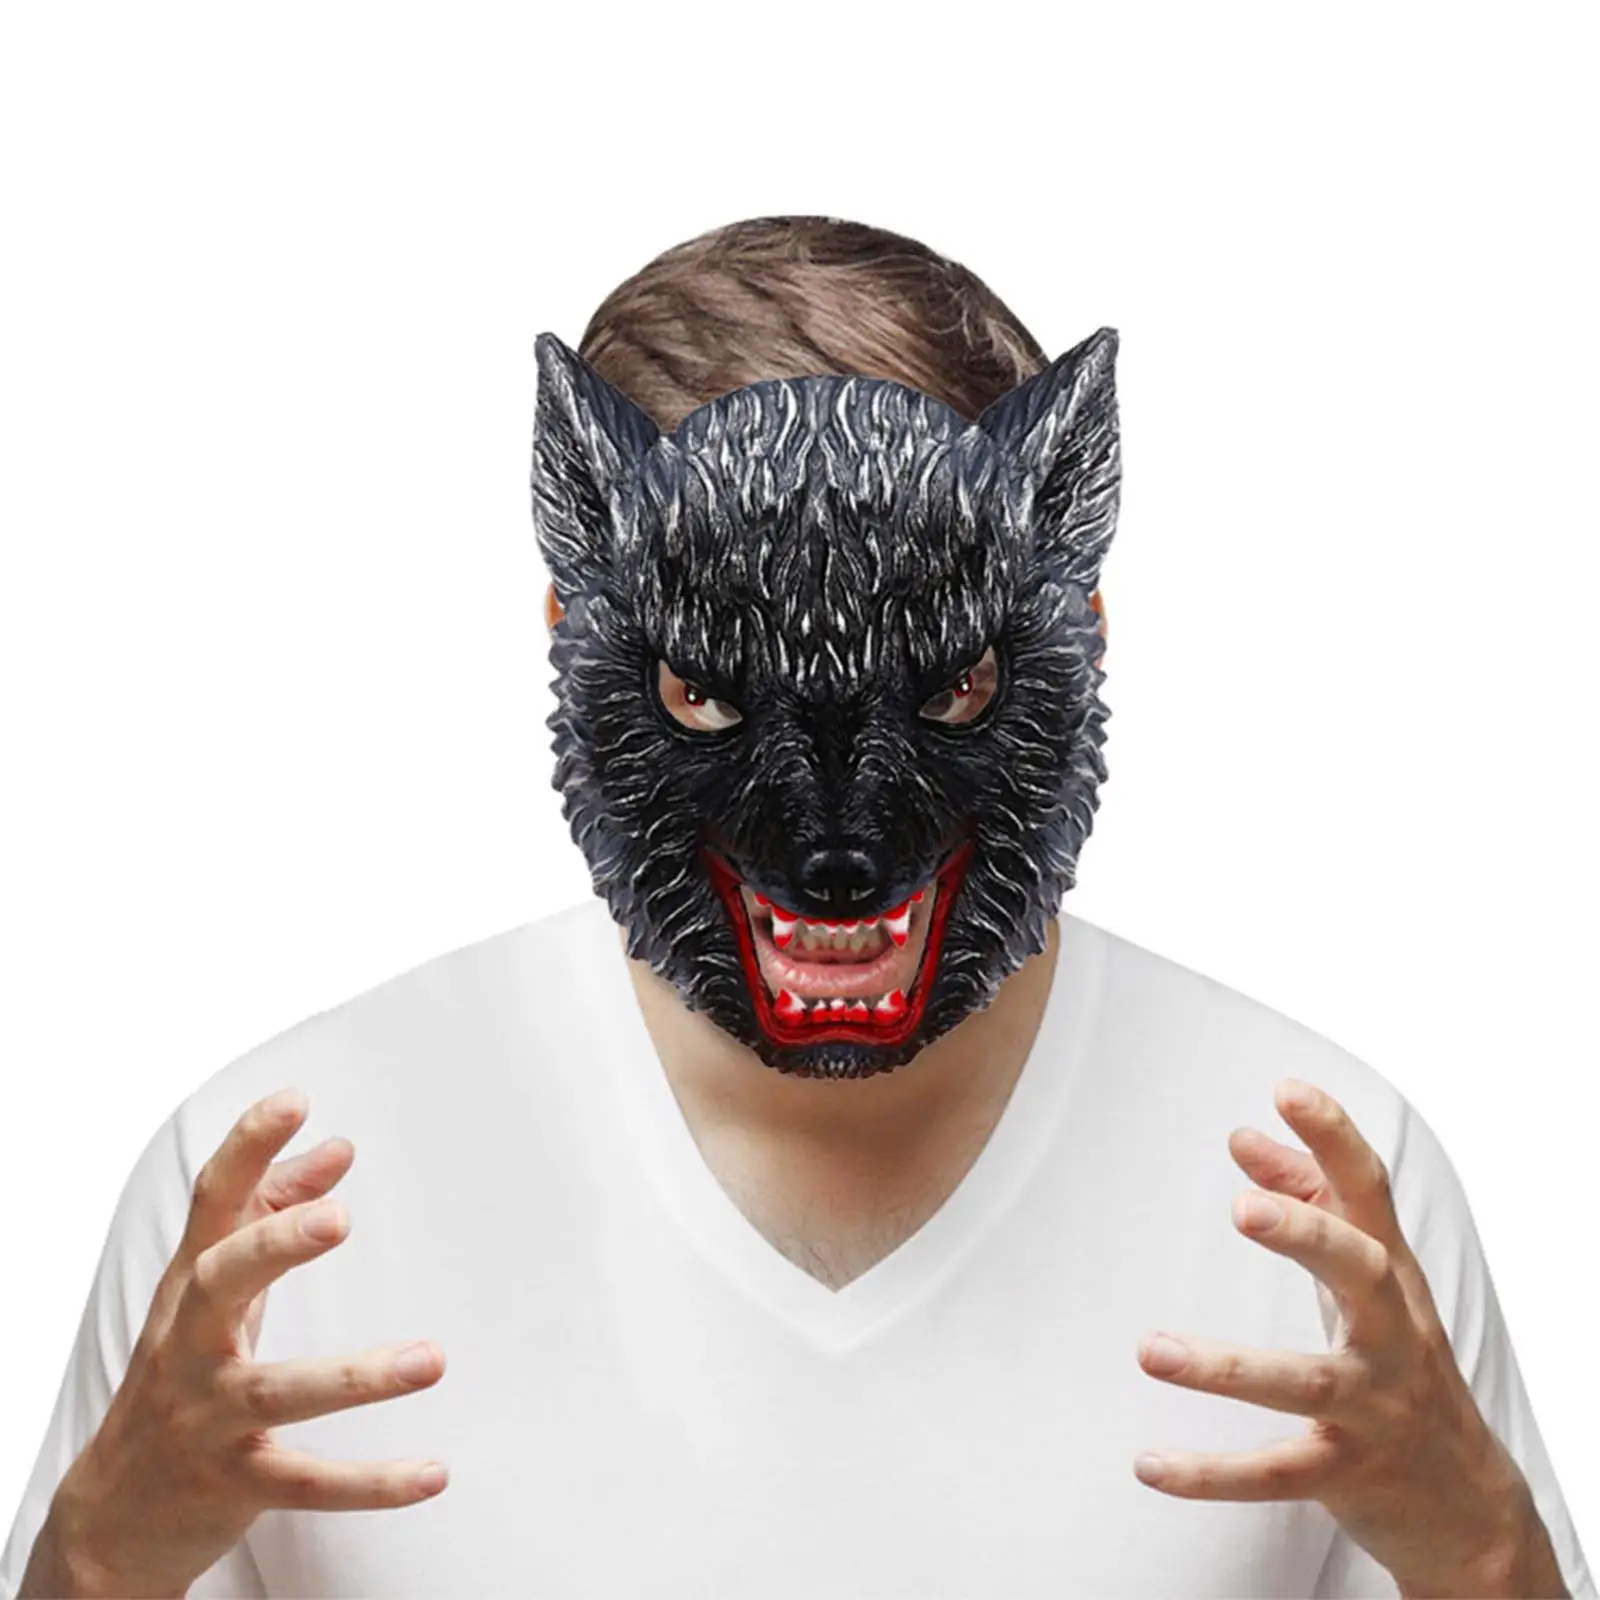 Halloween Wolf Mask Masquerade Cosplay Costume Accessories Party Supplies Animal Werewolf Half Face for Adults Movie Theme